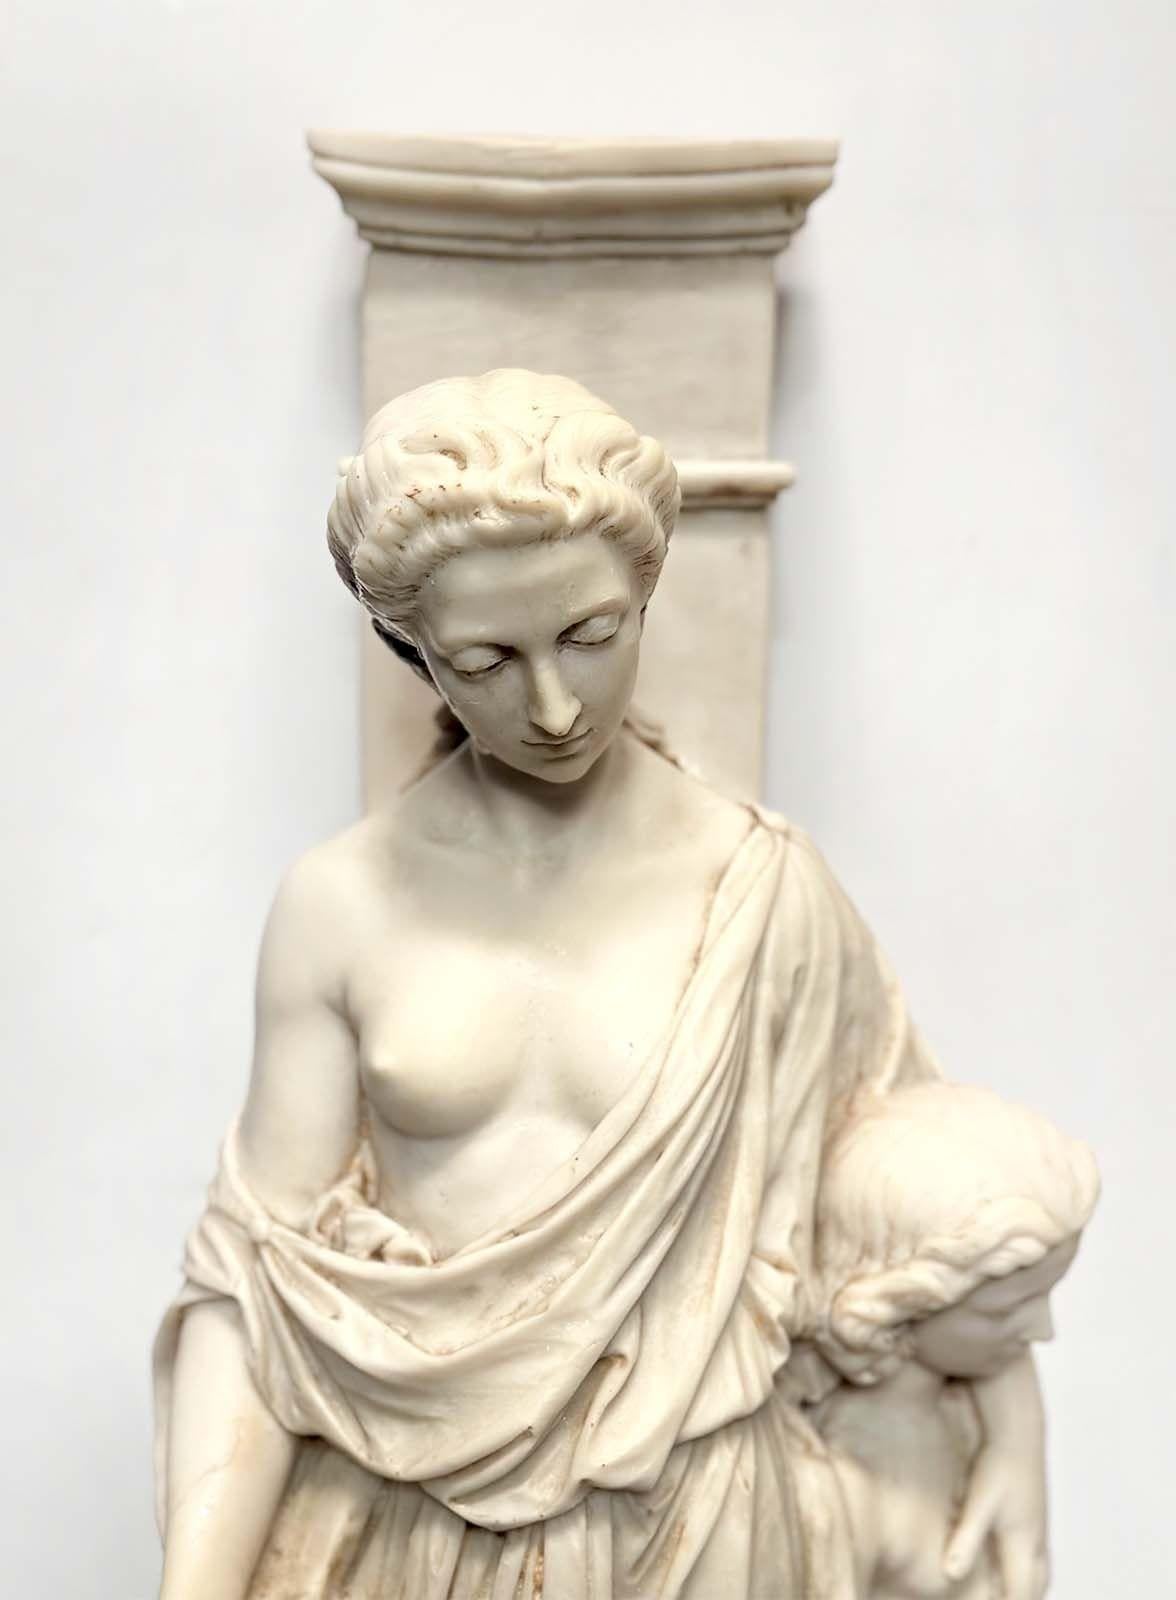 Pair of delightful white cast marble sculptures made in Italy in the 1900's capture the essence of maternal joy and the innocence of childhood. In one sculpture, a radiant woman tenderly embraces a little girl with one arm, while a playful little